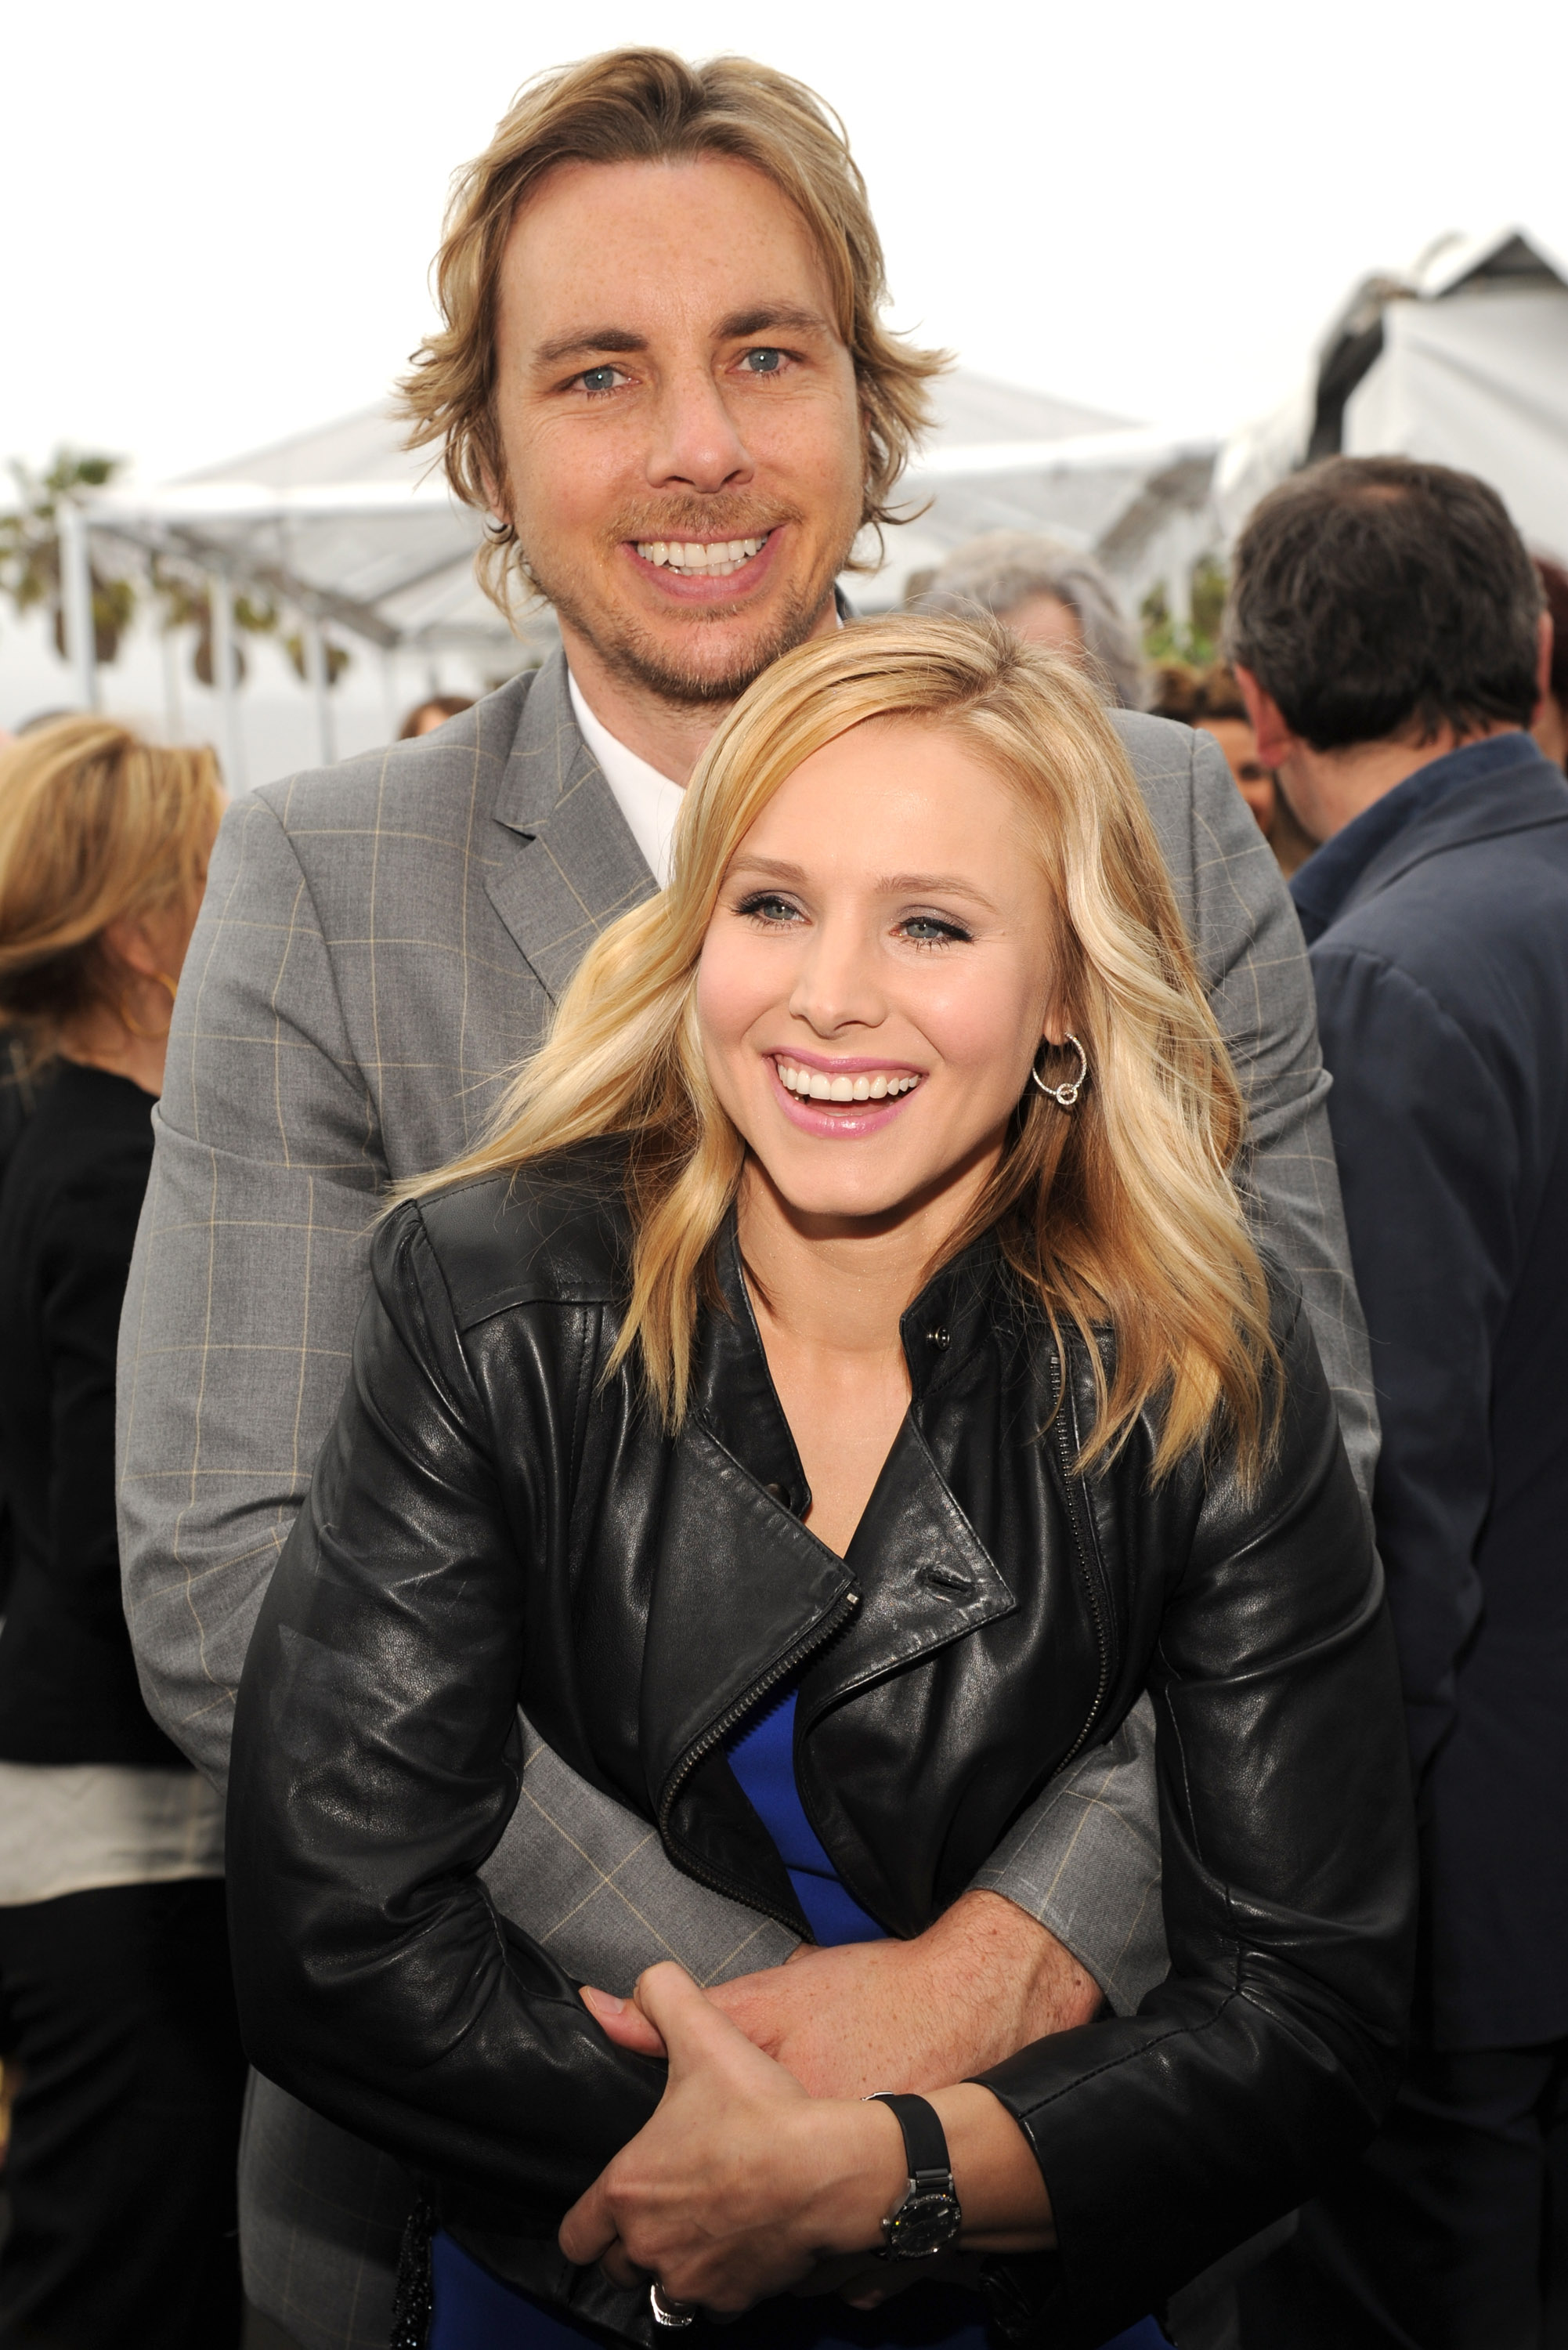 Dax Shepard and Kristen Bell at the Film Independent Spirit Awards in Santa Monica, California on March 1, 2014 | Source: Getty Images